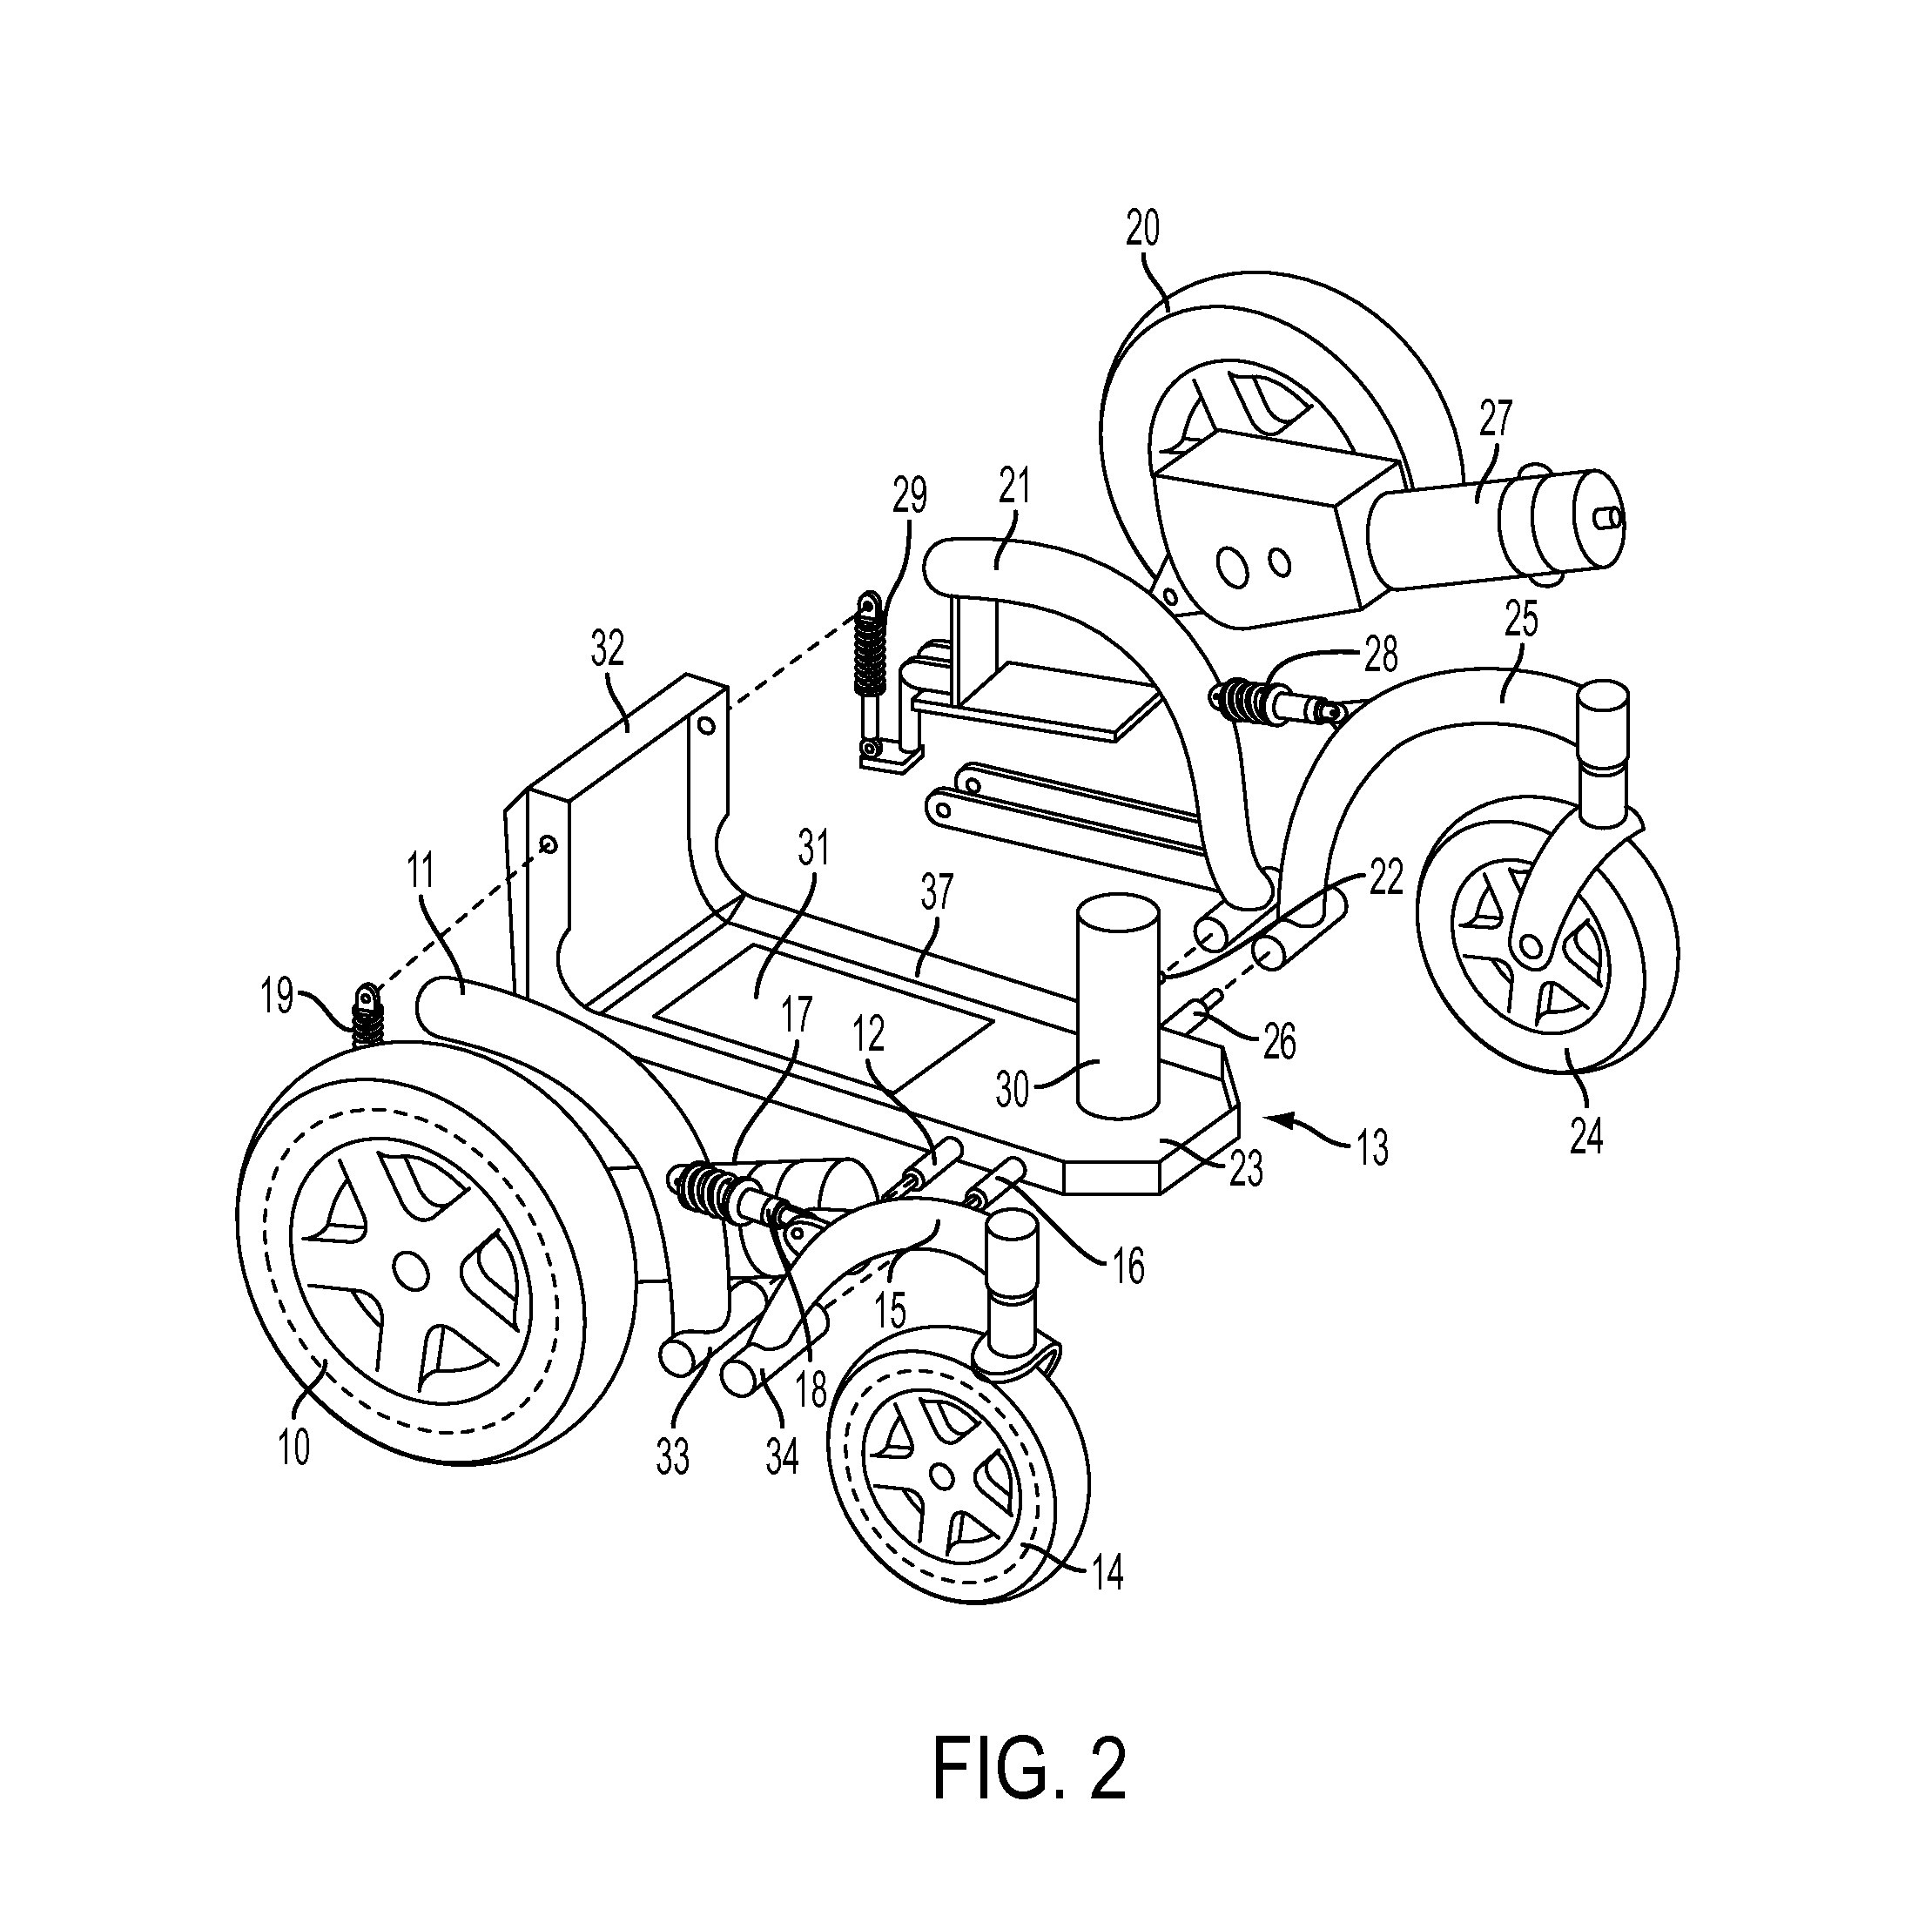 Wheelchair with suspension arms